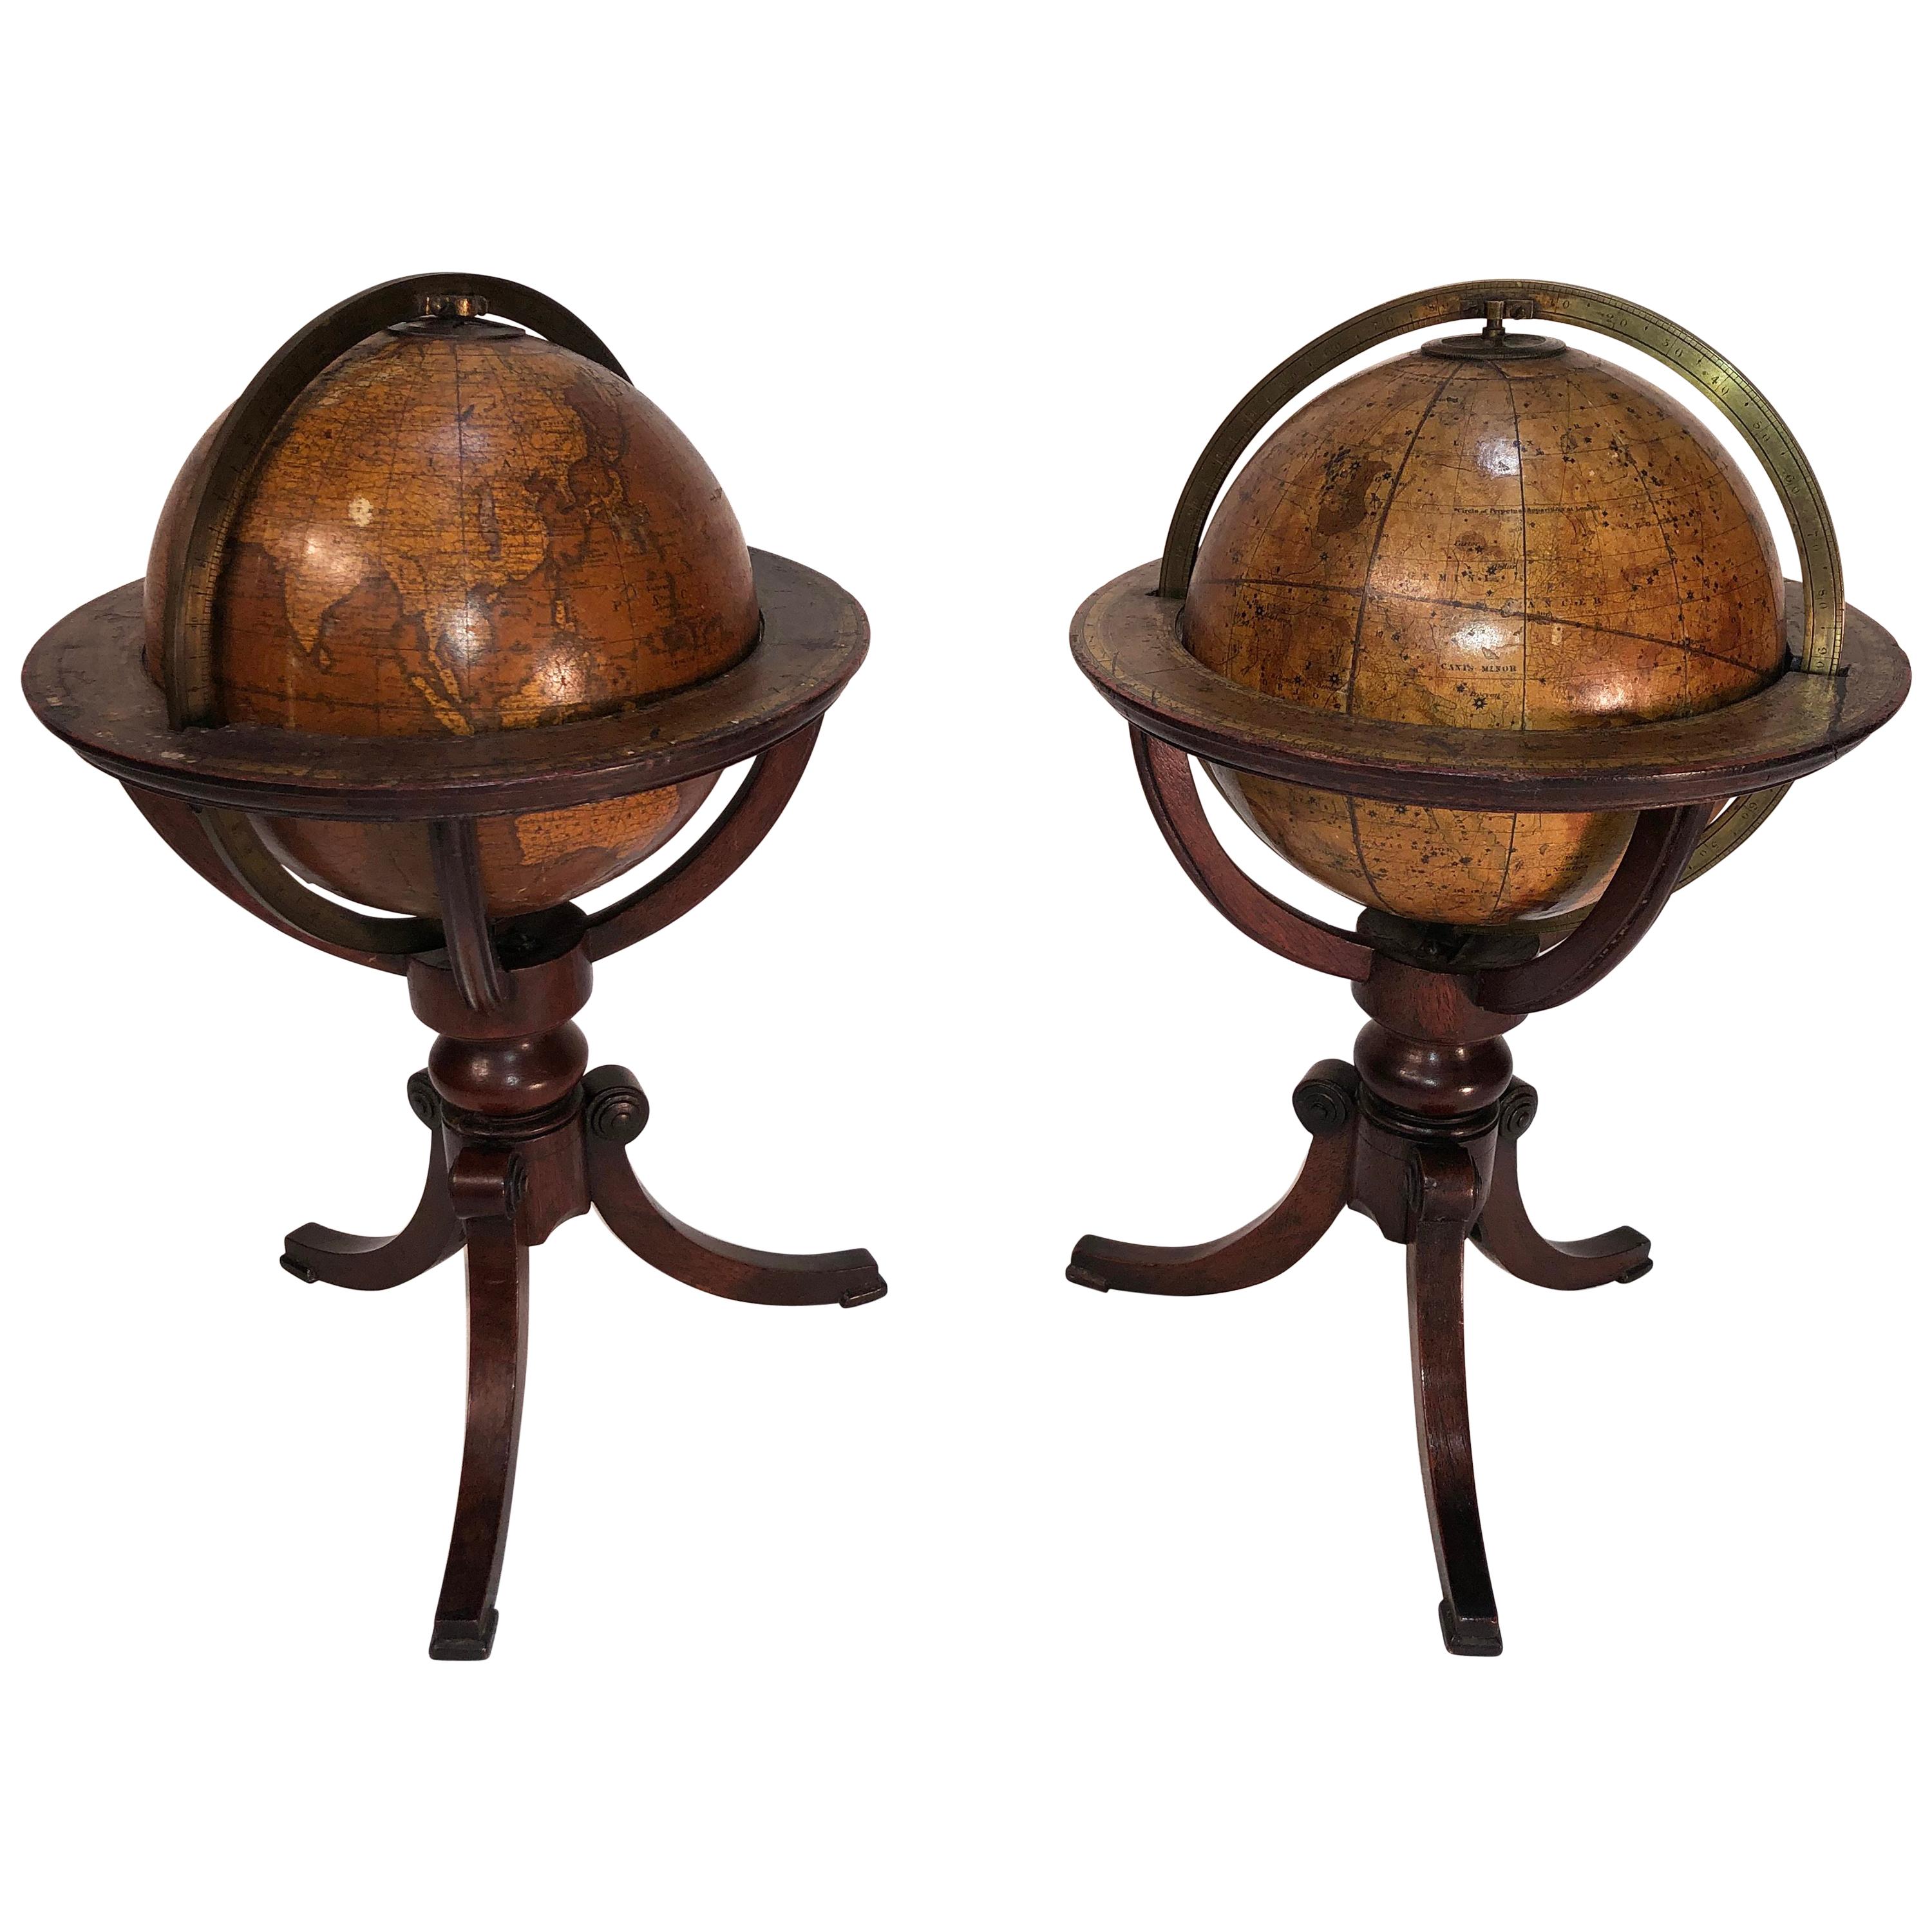 Pair of Miniature 19th Century Globes, Terrestrial and Celestial